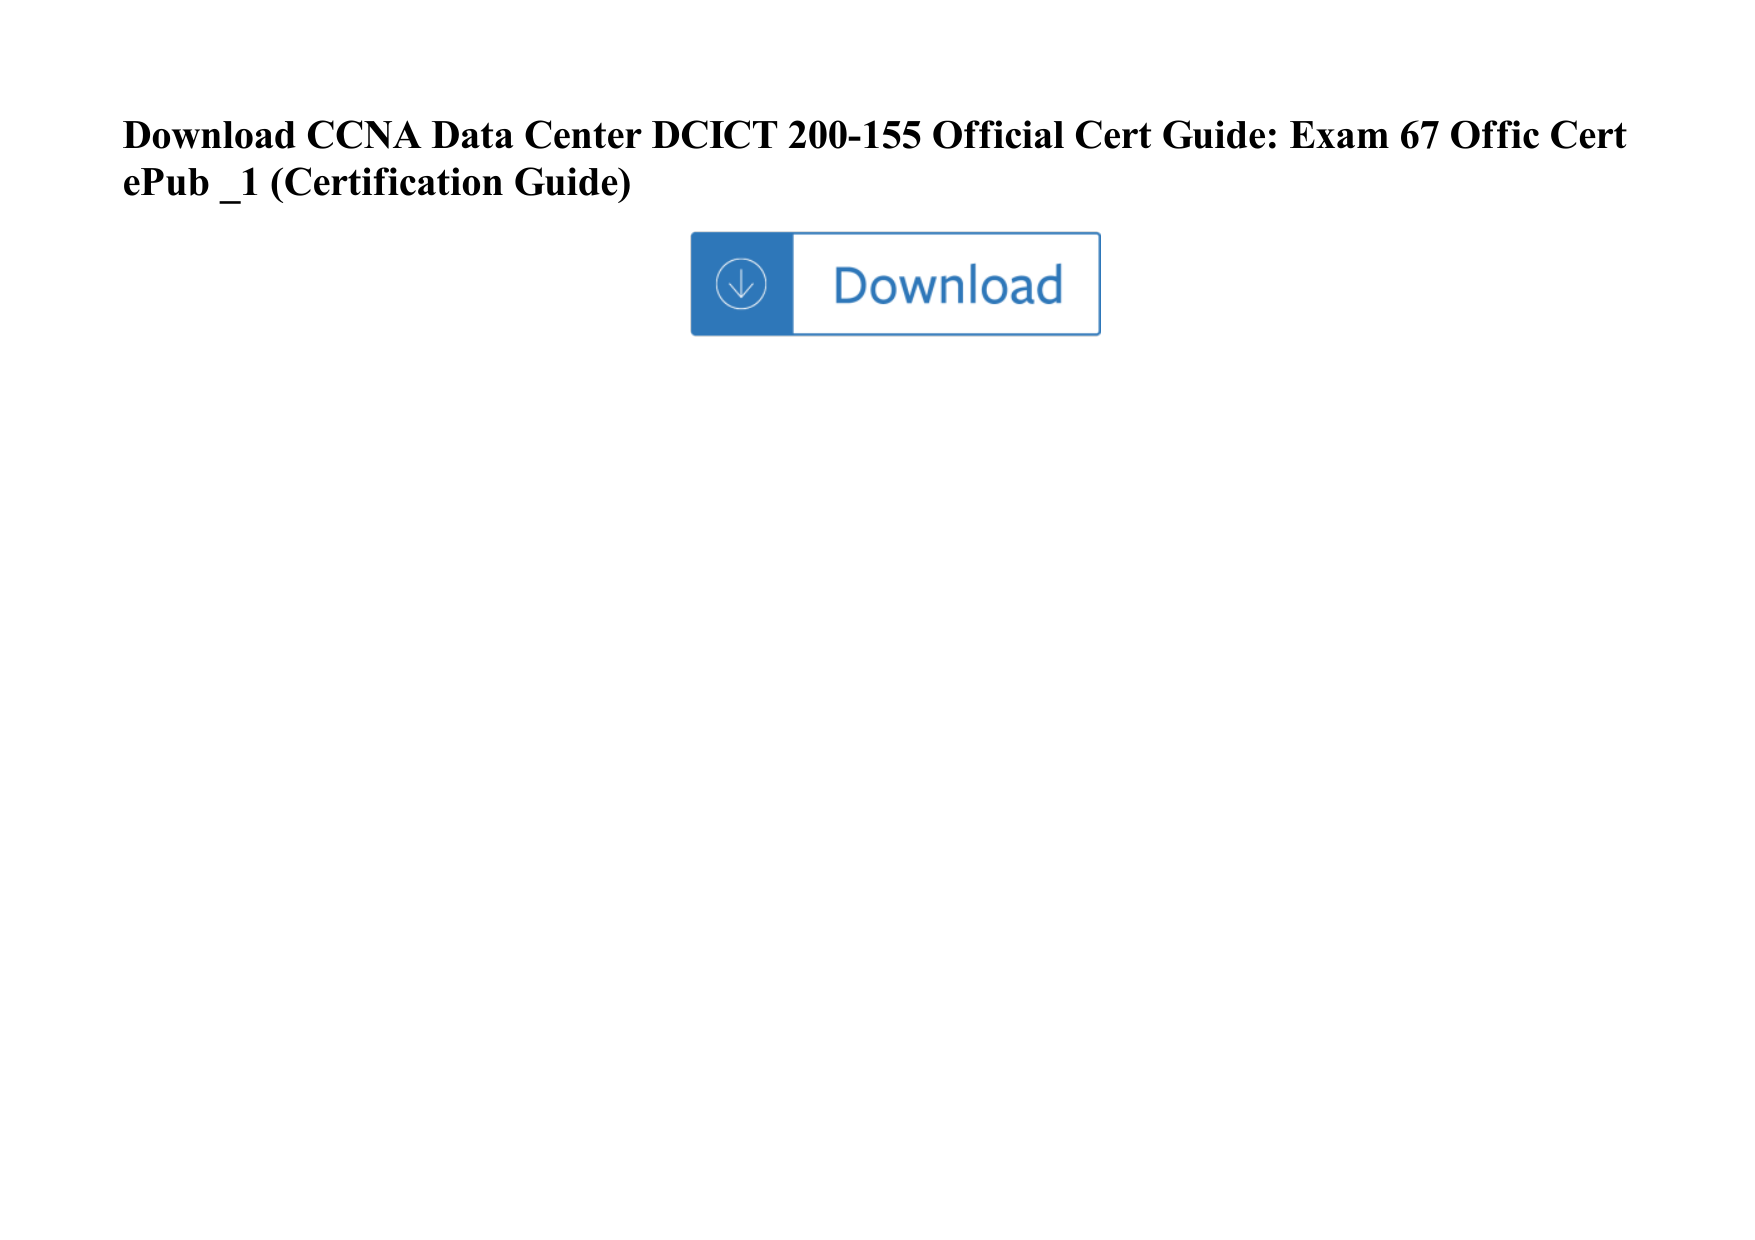 Page 1 of 2 - CCNA Data Center DCICT 200-155 Official Cert Guide: Exam 67 Offic EPub _1 (Certification Guide) Ccna-data-center-dcict-200-155-official-cert-guide-exam-67-offic-cert-epub-1-certification-guide